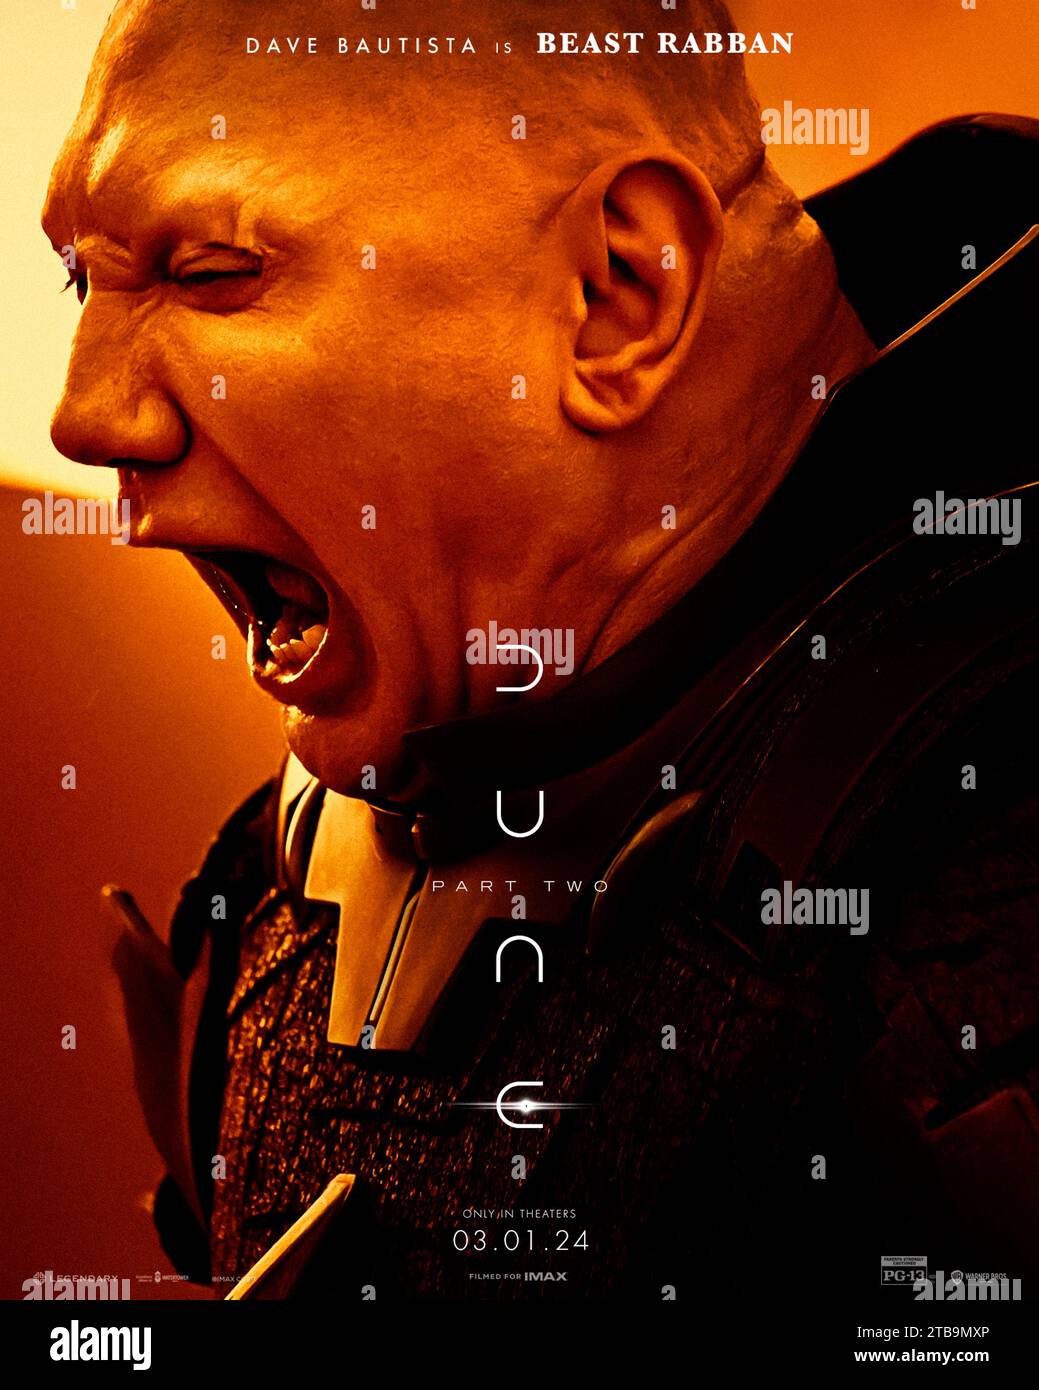 Dune: Part Two (2024) directed by Denis Villeneuve and starring Dave Bautista as Beast Rabban in this big screen adaptation of Frank Herbert's sci-fi masterpiece. Paul Atreides unites with Chani and the Fremen while seeking revenge against the conspirators who destroyed his family. US character poster ***EDITORIAL USE ONLY***. Credit: BFA / Warner Bros Stock Photo